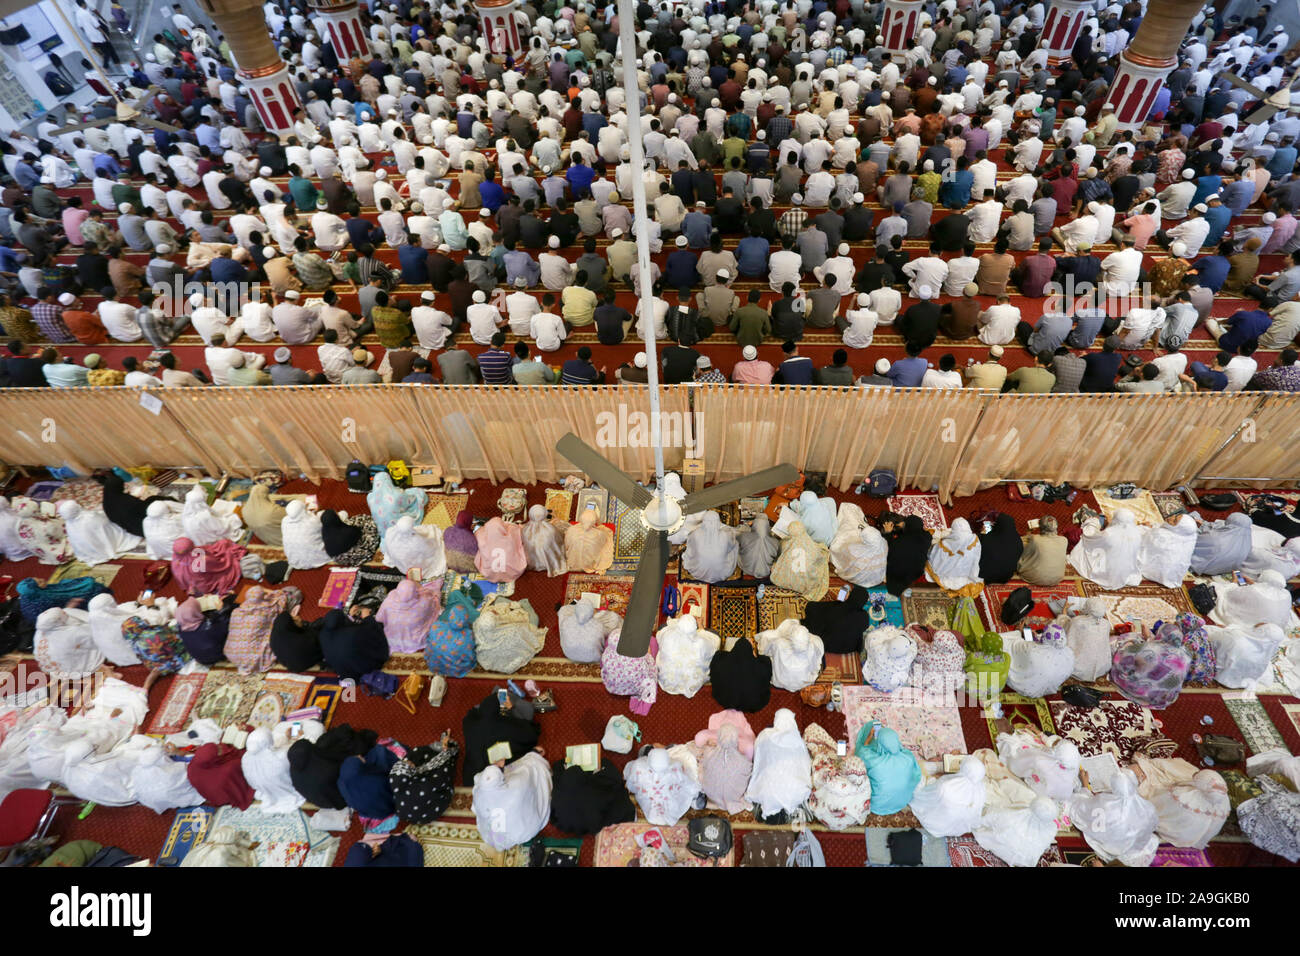 Celebration of congregational prayers at the Oman Mosque or Al Makmur Grand Mosque, Banda Aceh, Indonesia Stock Photo